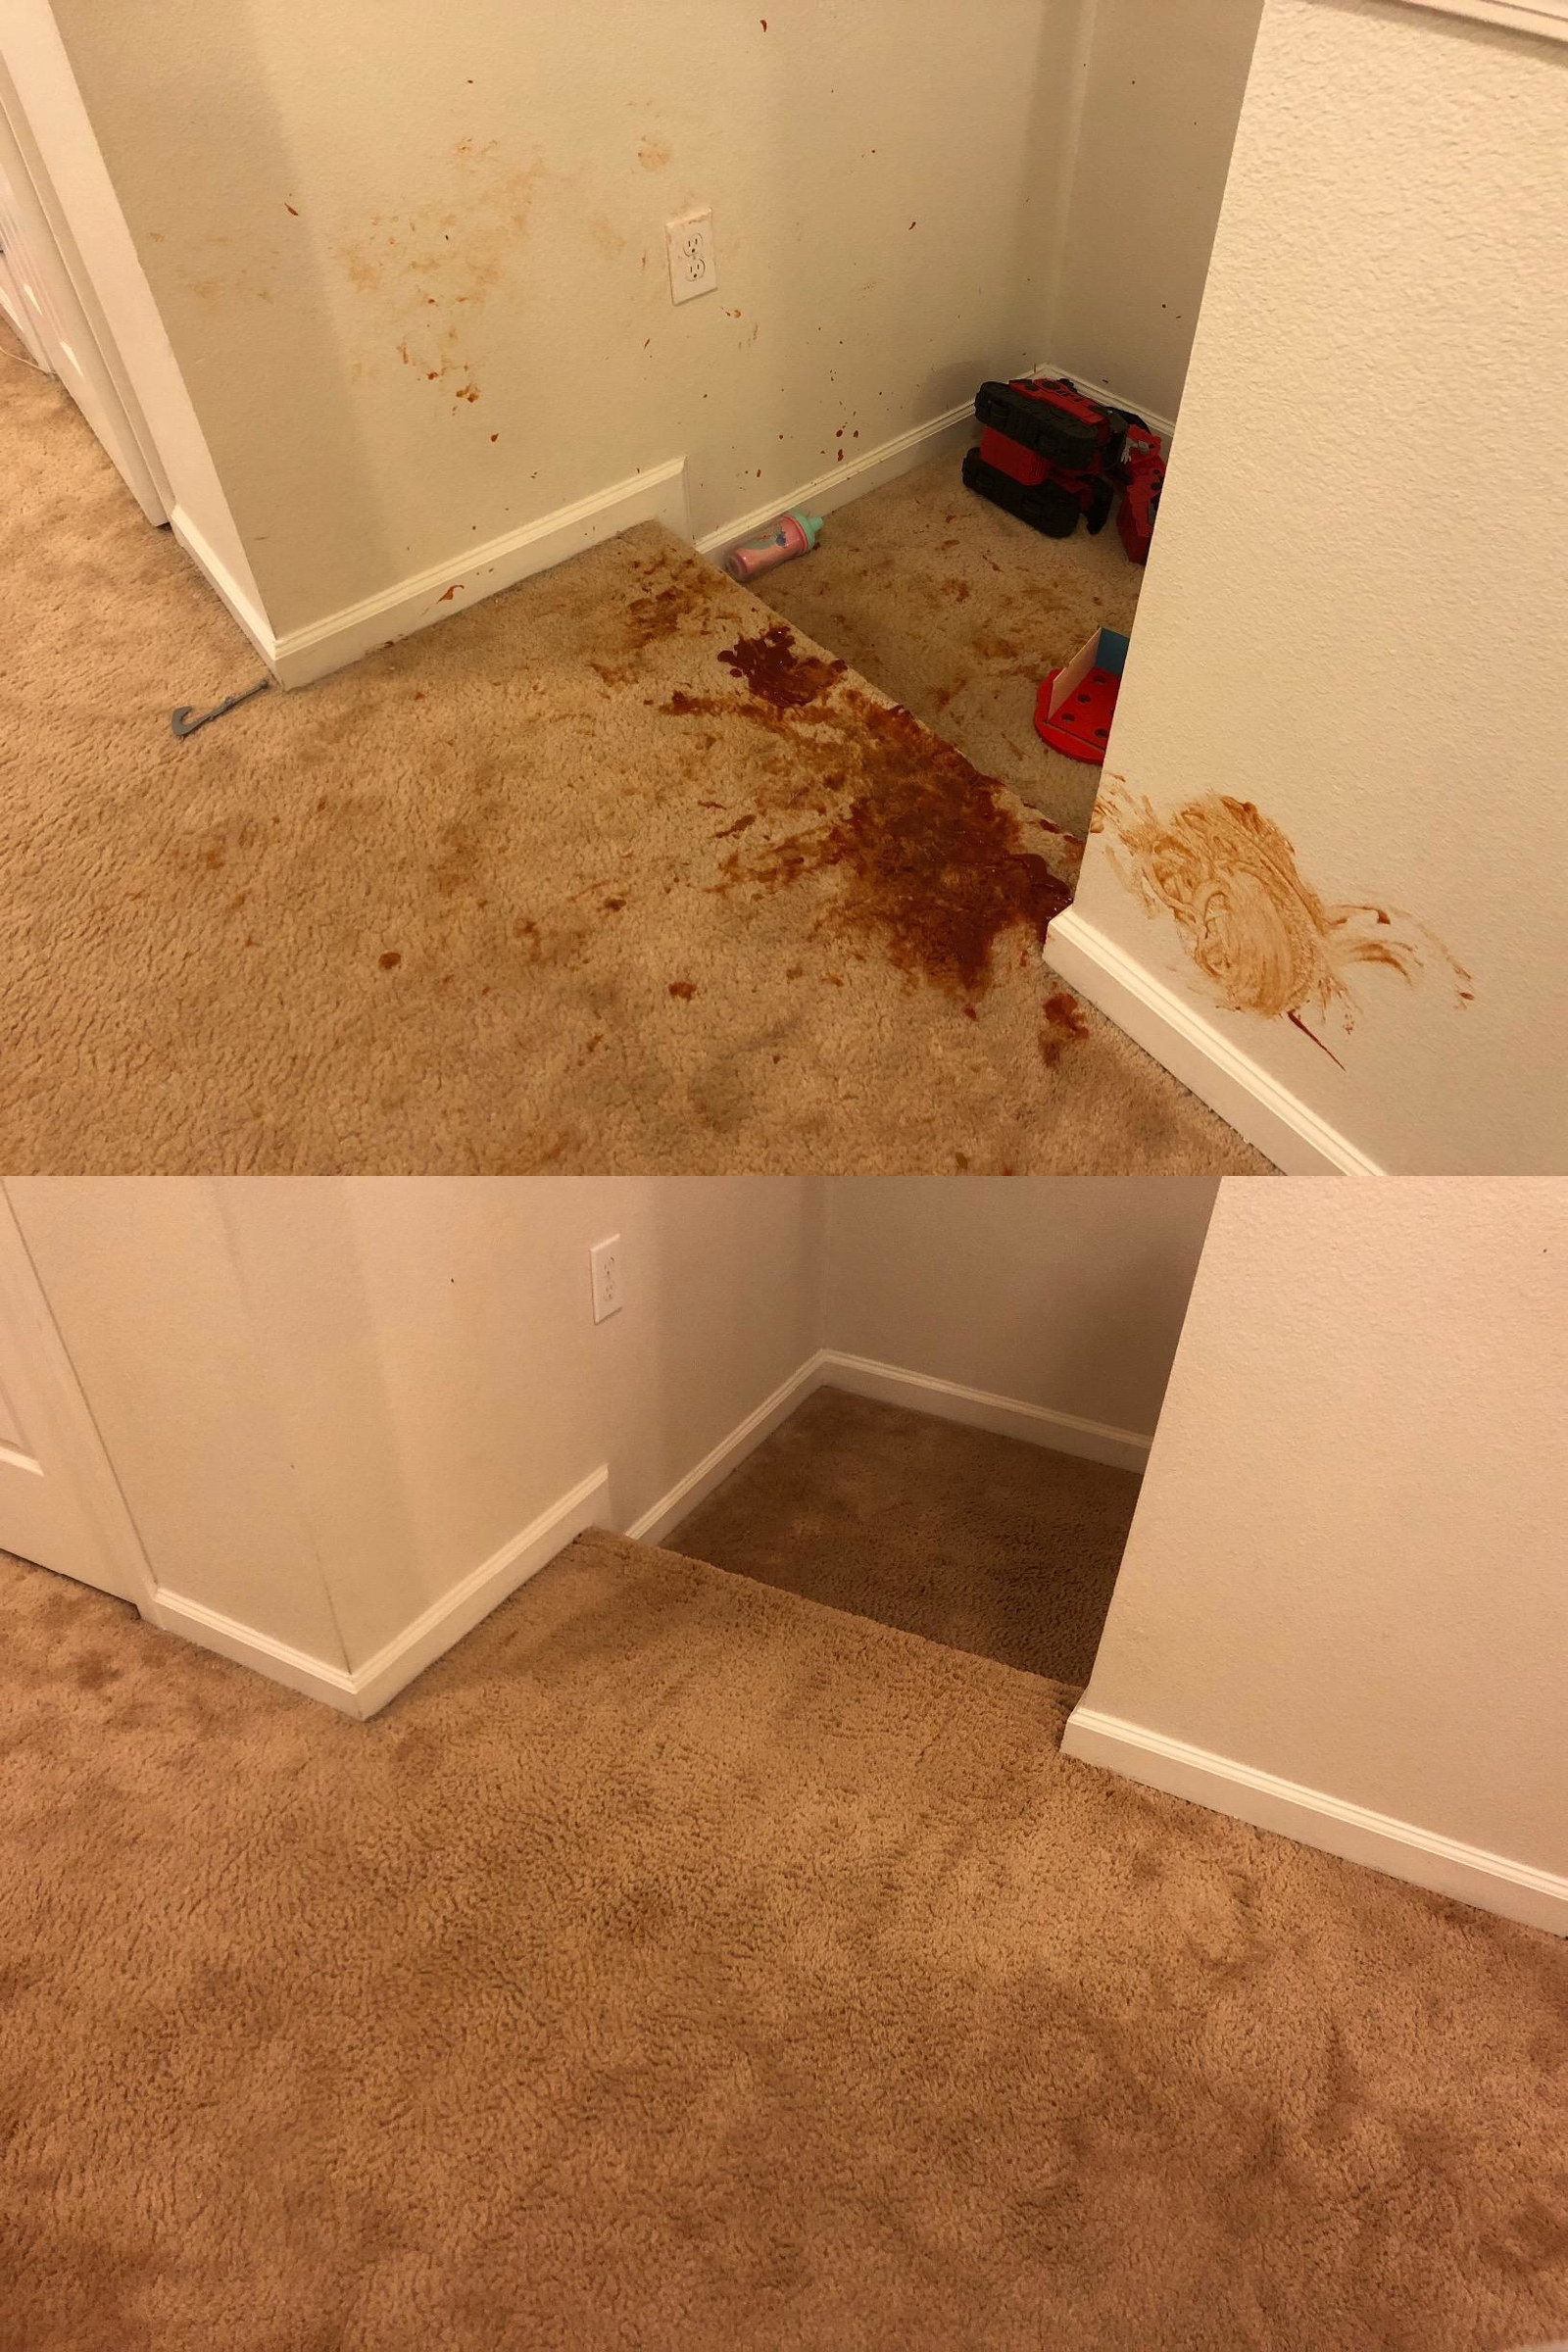 A reviewer&#x27;s before: ketchup splattered all over their carpet and walls and after: the same scene, no ketchup in sight